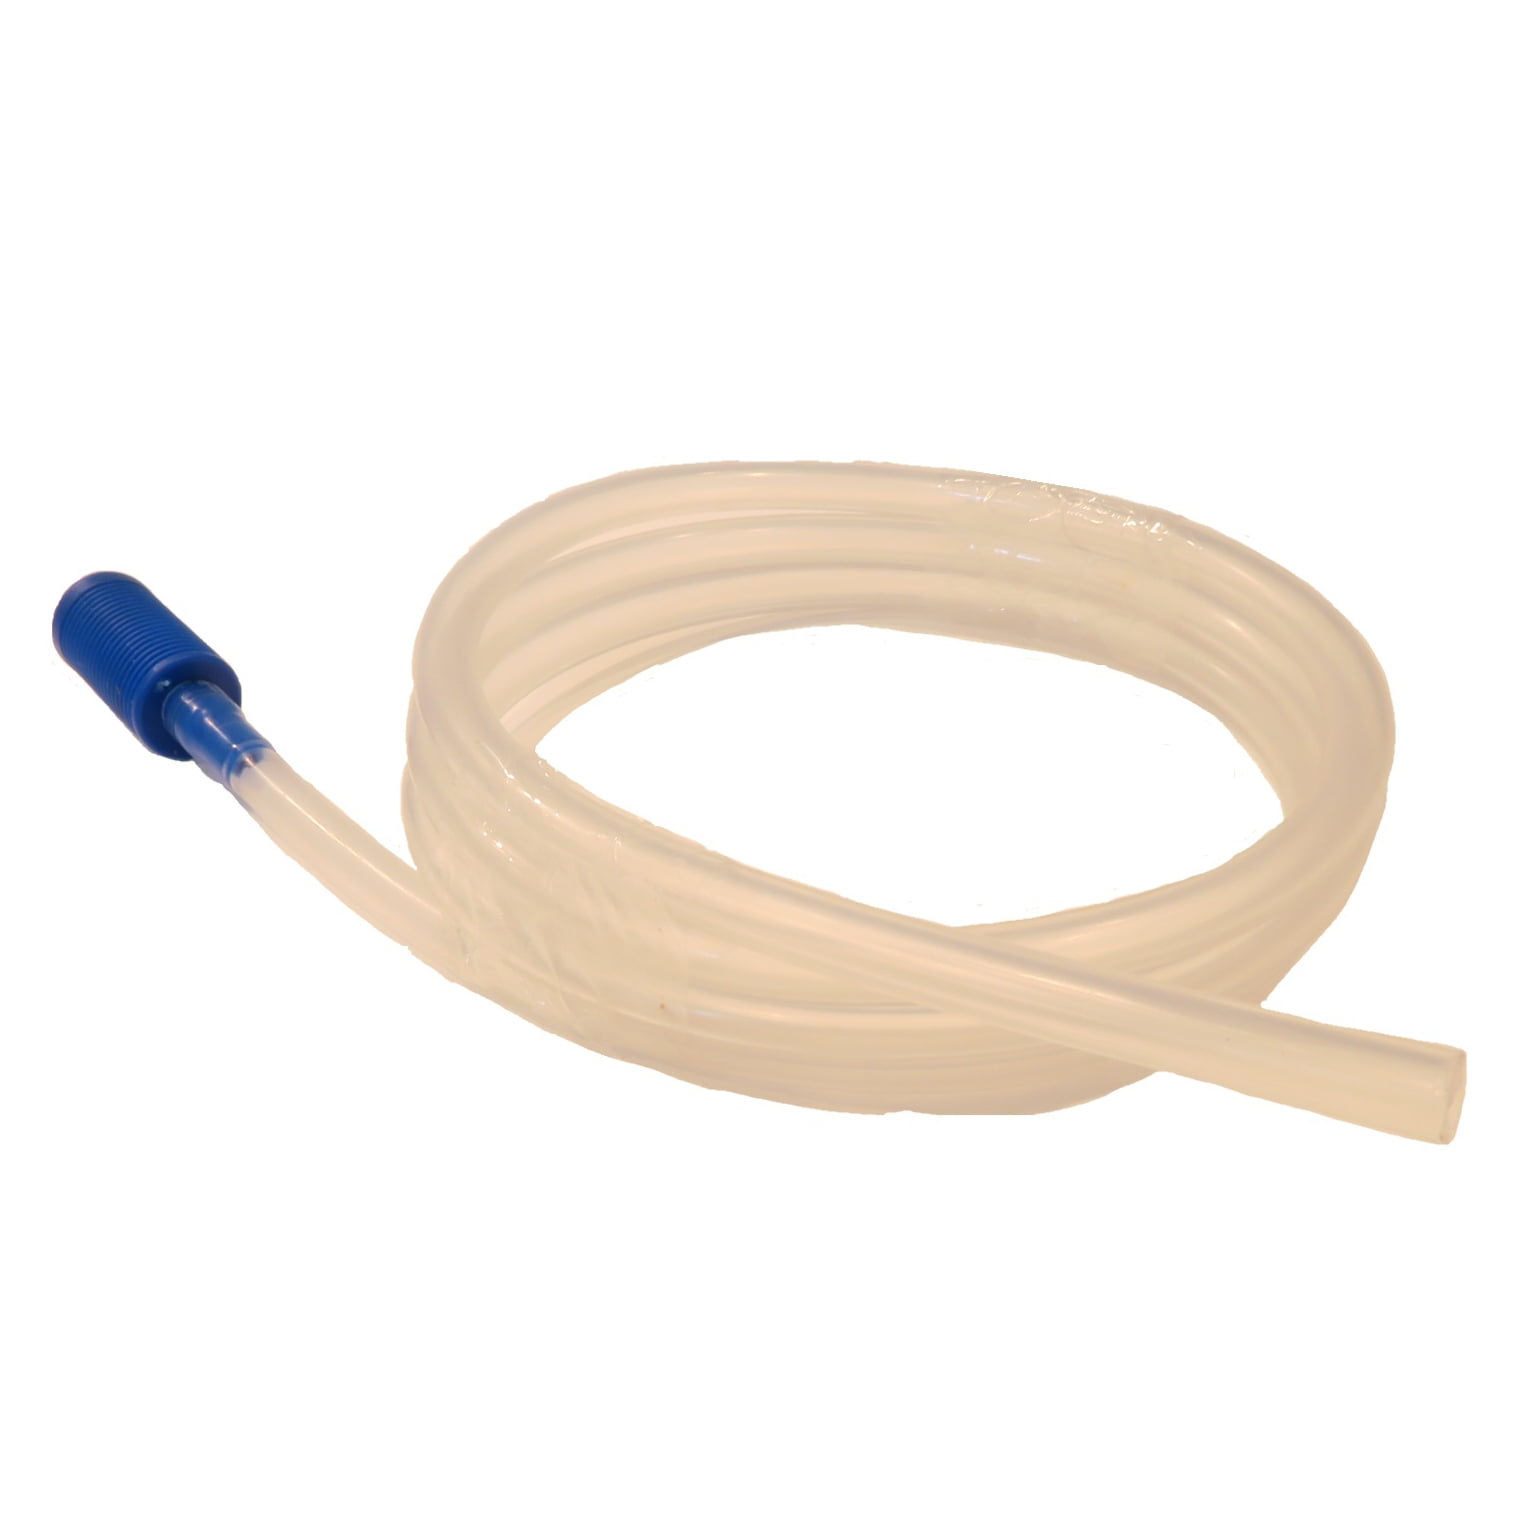 PRESSURE WASHER SIPHON HOSE & FILTER for Campbell Hausfeld Champion Coleman Pump 